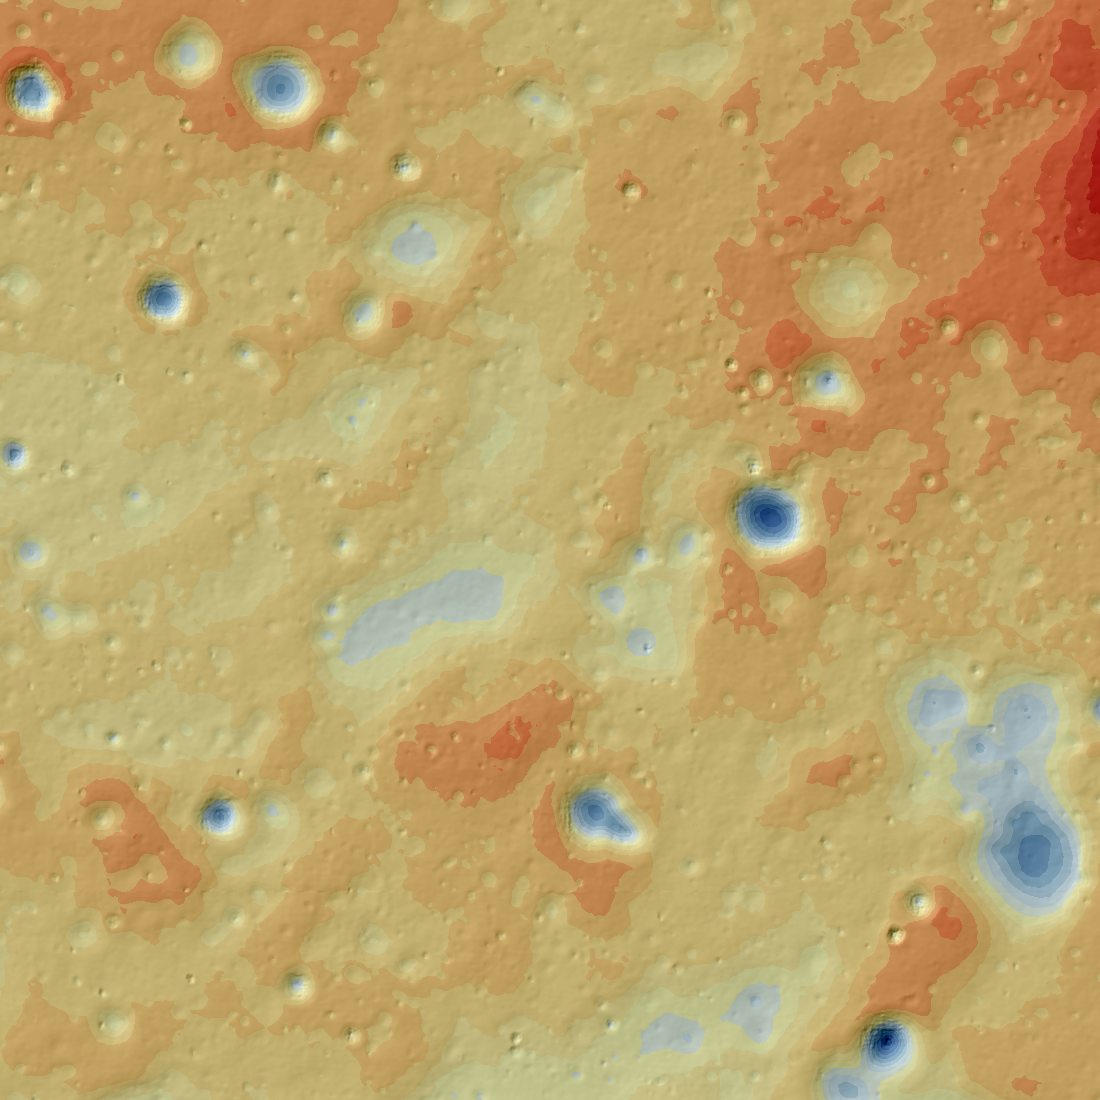 Topographic Map of the Chang'e 4 Site